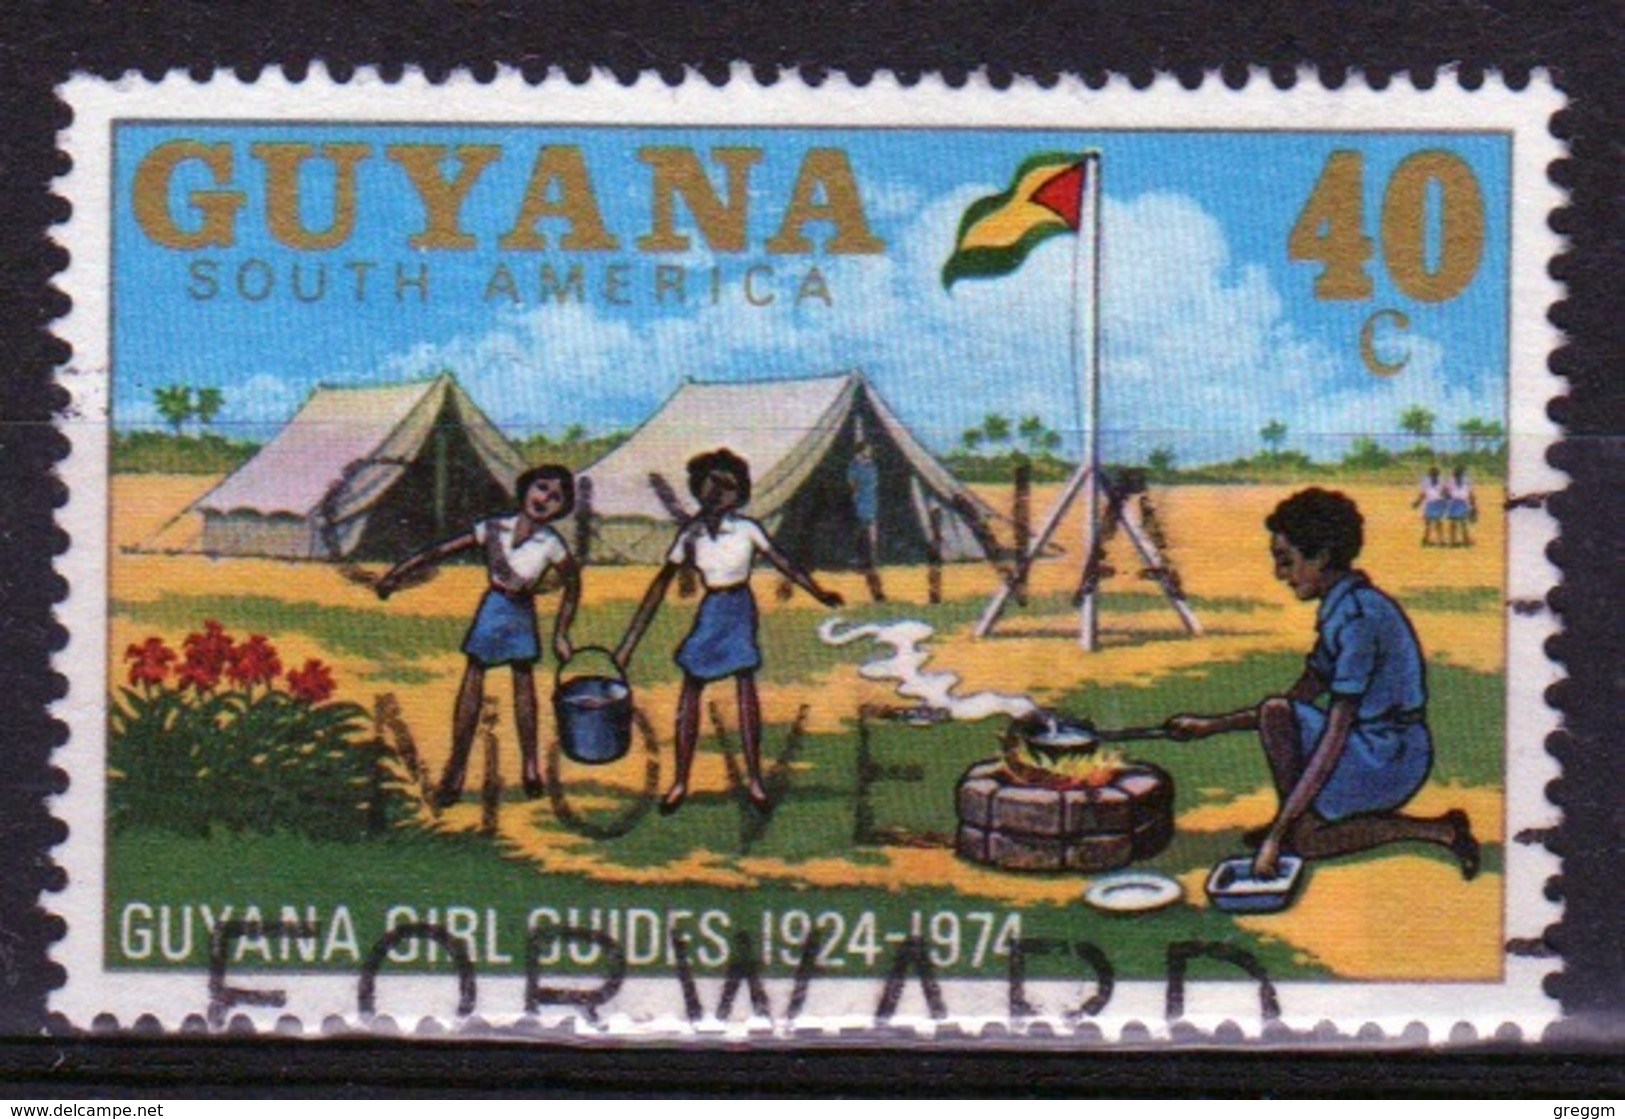 Guyana 1974 Single 40c Stamp From The Golden Jubilee Of The Girl Guides Set. - Guyana (1966-...)